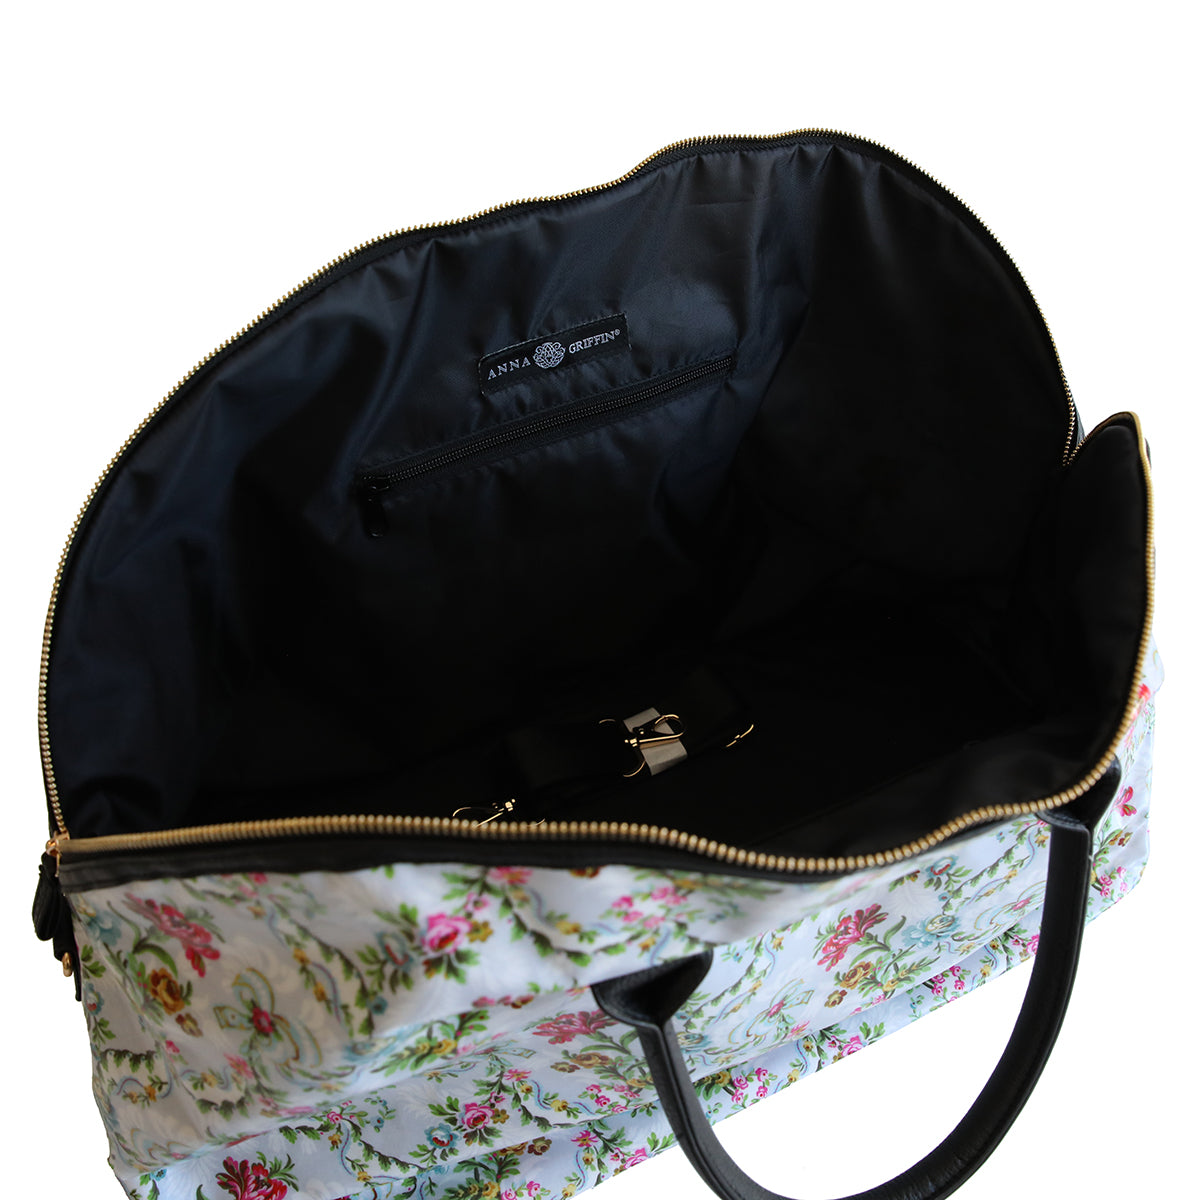 Open Phoebe Duffle Bag with a nylon interior, displaying an inner zipper pocket and gold-tone hardware.